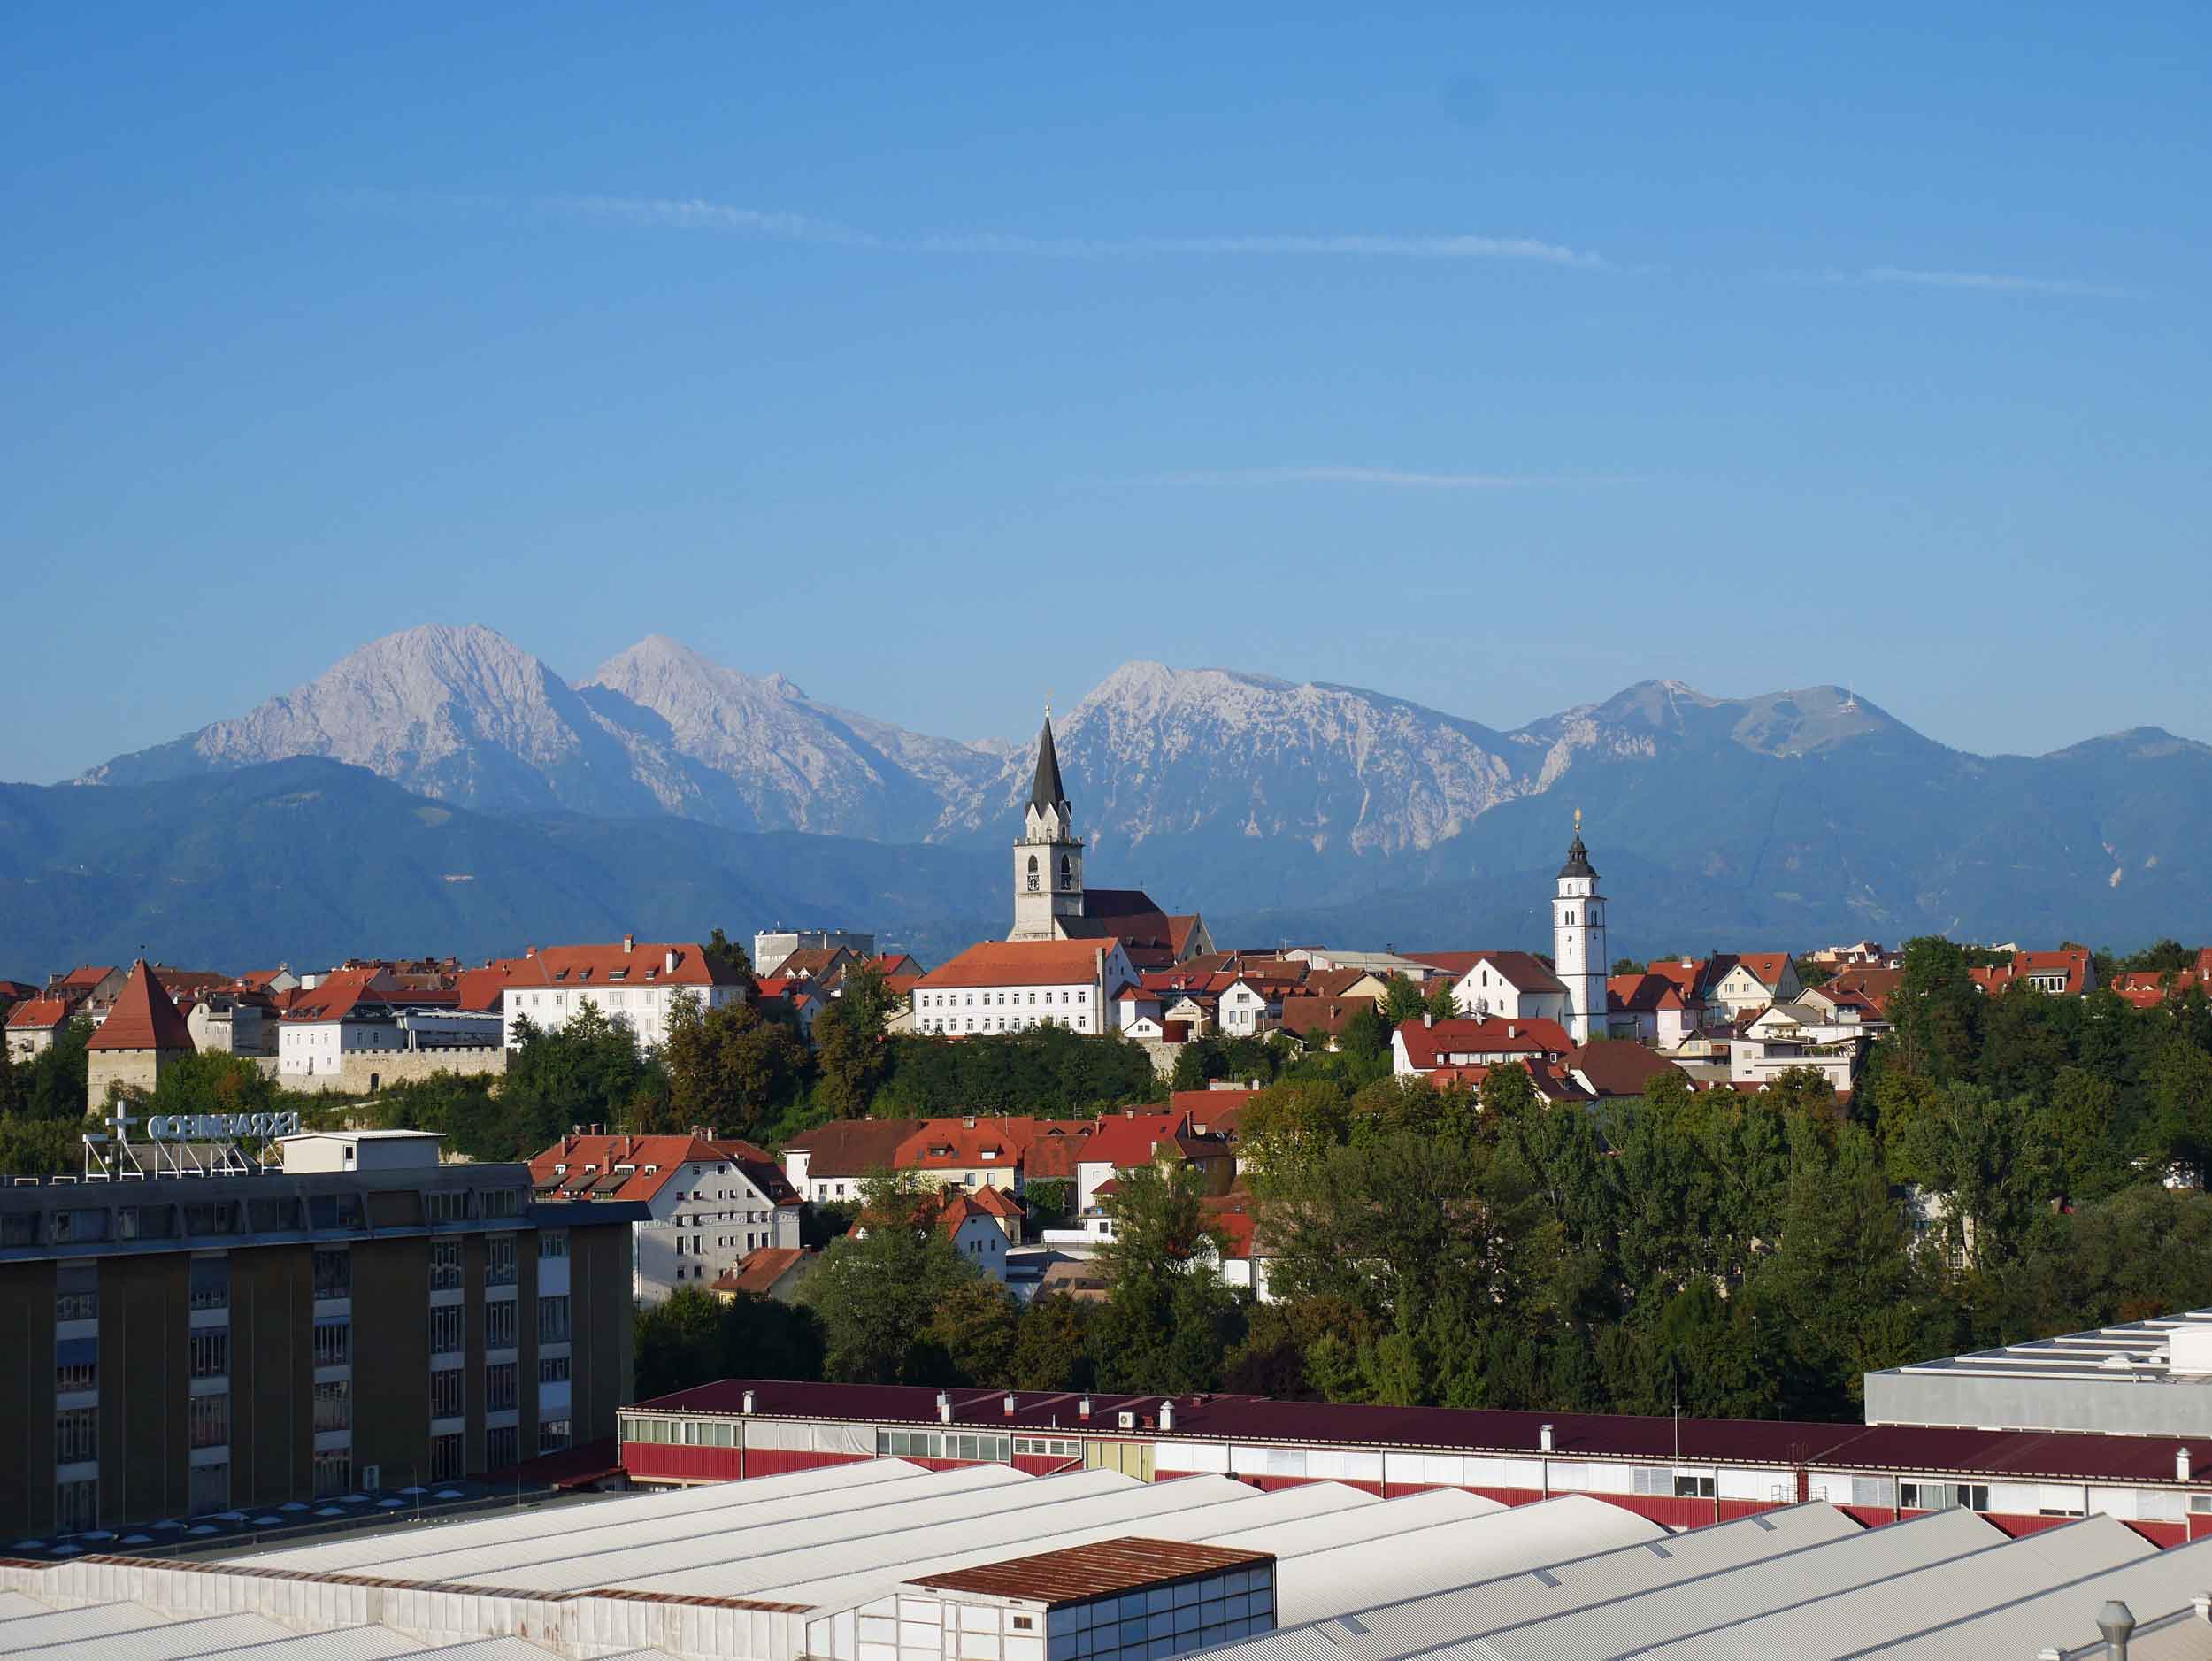  Arriving from the southern Balkans, Slovenia was a relief in both temperature and lifestyle of more traditional European villages, such as Kranj, our fist stop (Aug 18). 